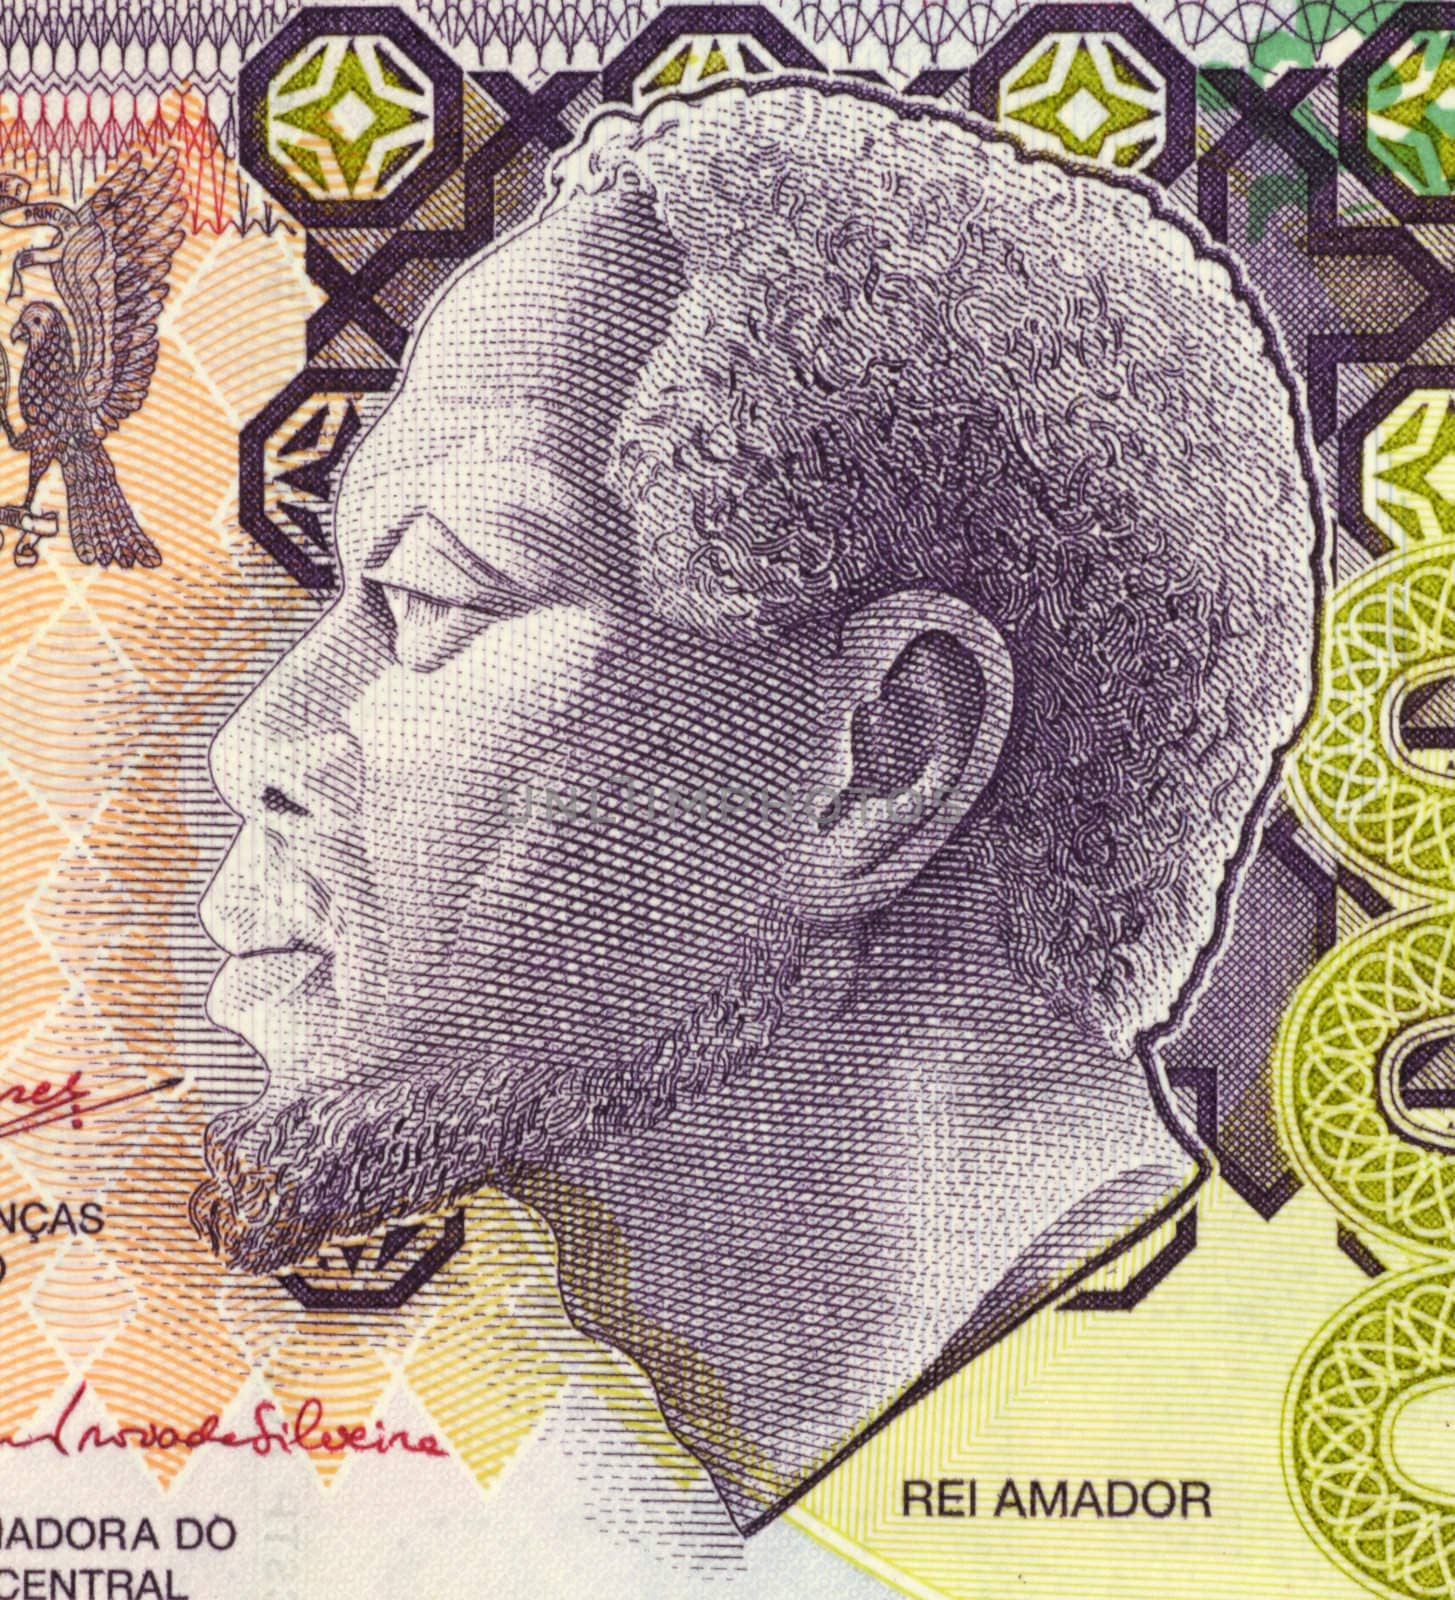 Rei Amador on 5000 Dobras 2004 Banknote from Saint Thomas and Prince